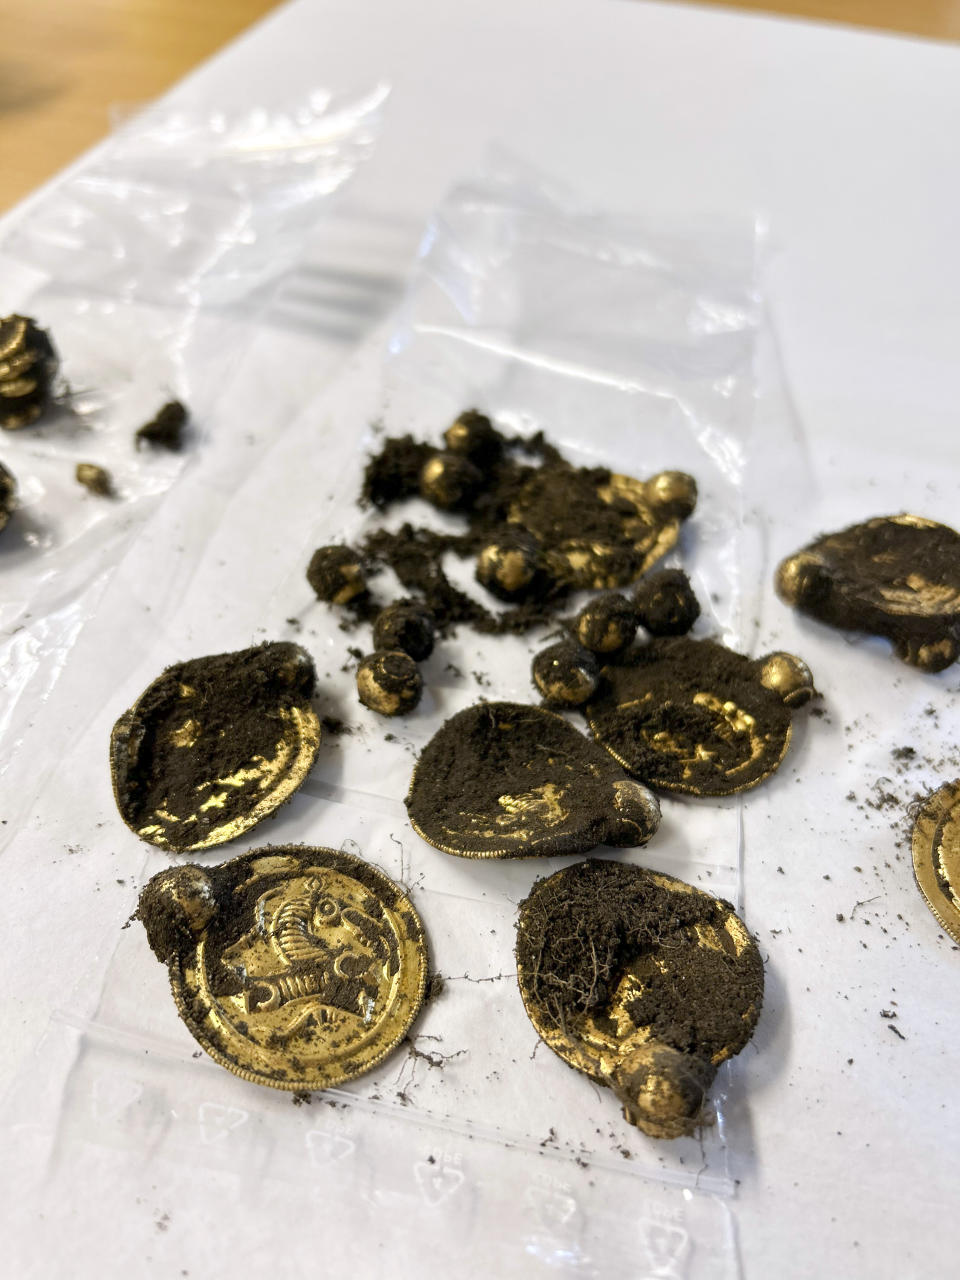 Gold treasure discovered by Erlend Bore with a metal detector on the island of Rennesoey in Stavanger, Norway, Thursday Sept. 7, 2023. Bore found nine pendants, three rings and 10 gold pearls on a southern island in what was described as the gold find of the century in Norway. (Anniken Celine Berger/Archaeological Museum, UiS via NTB via AP)